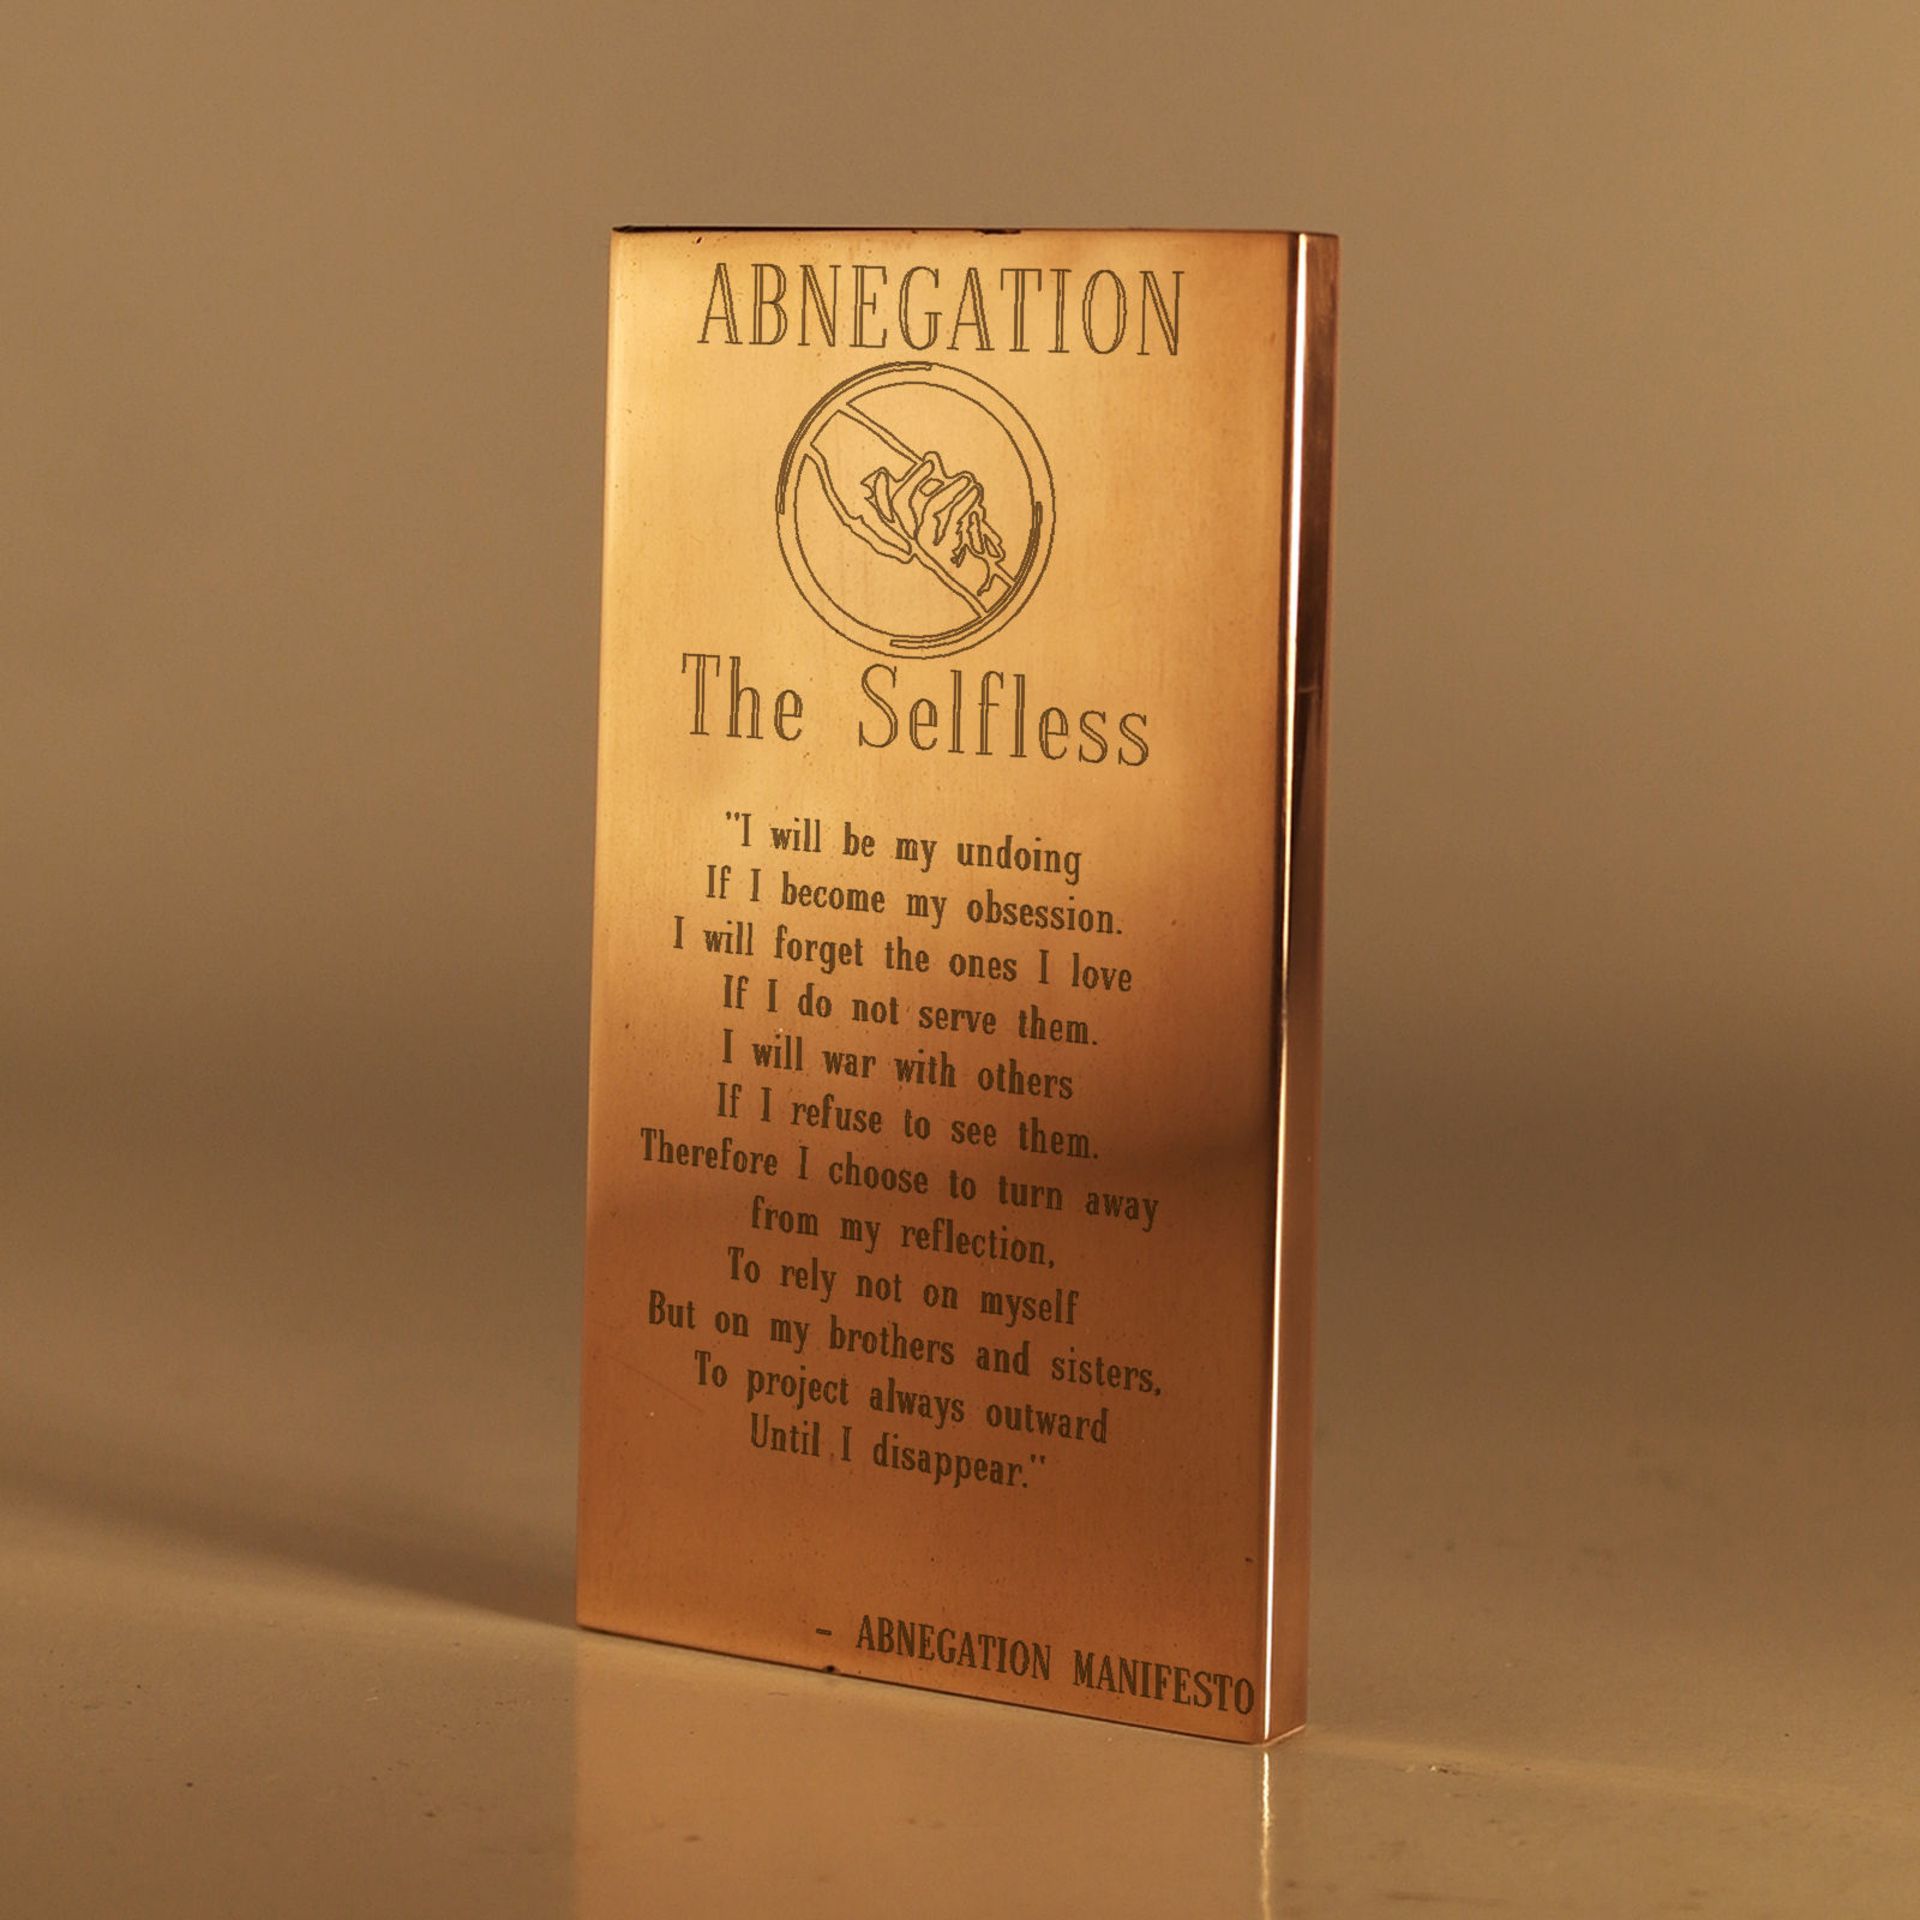 .999 COPPER BULLION 1/2LB - rare collectors item GIFT FOR THE MAN (OR WOMAN) WHO HAS EVERYTHING! All - Image 3 of 6